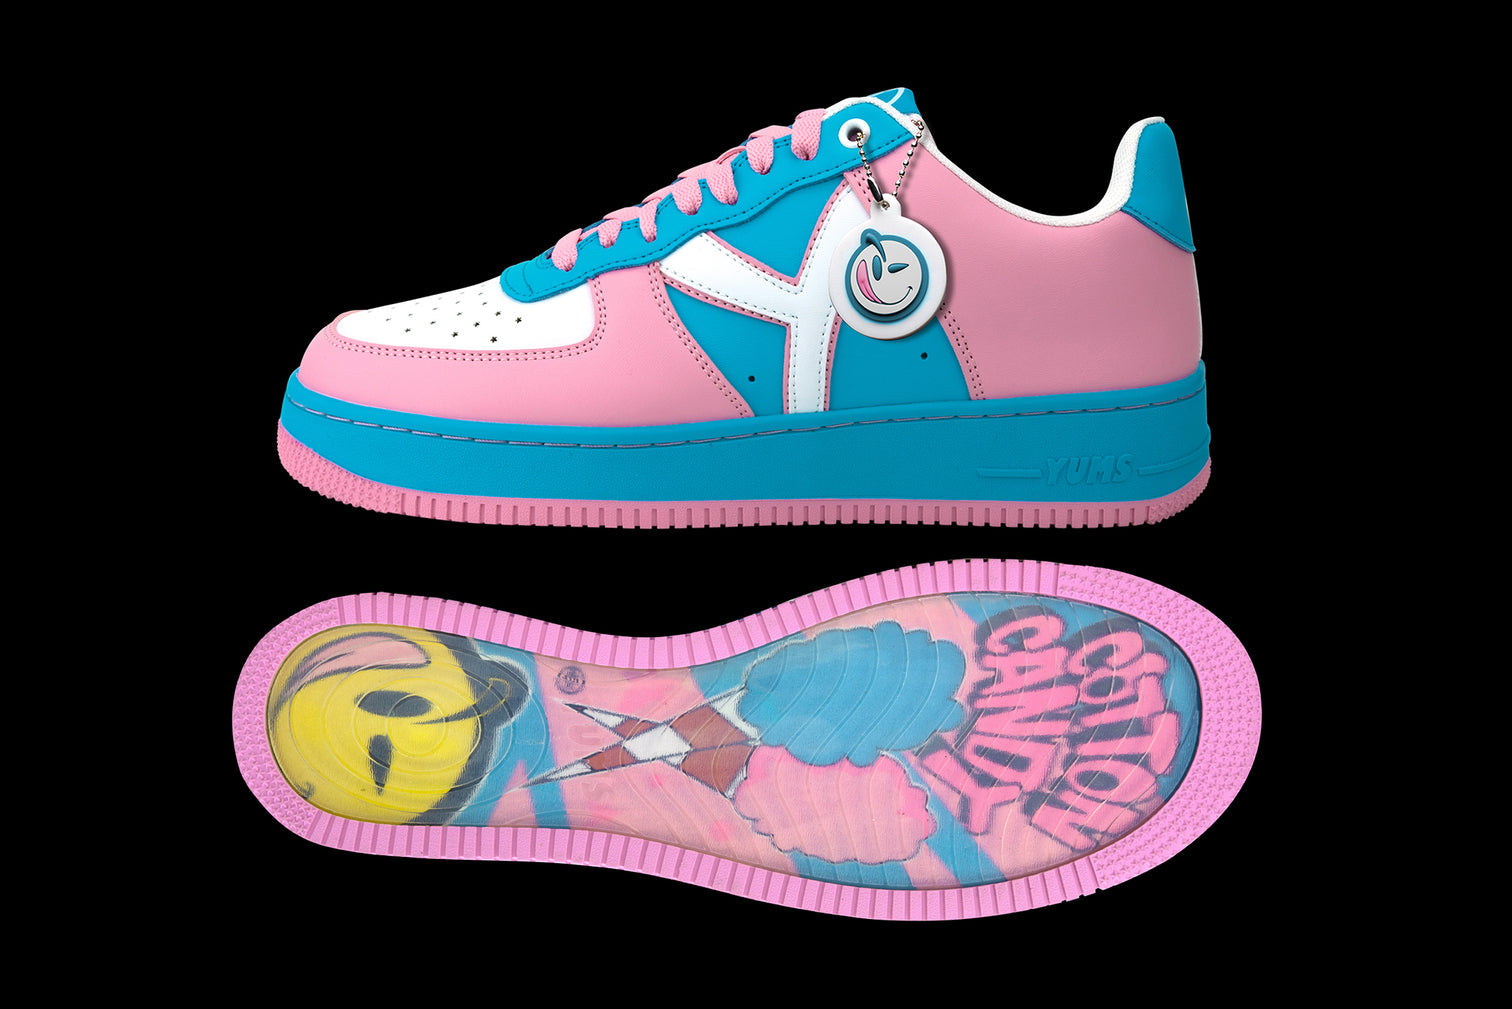 Yums sneakers “cotton candy”